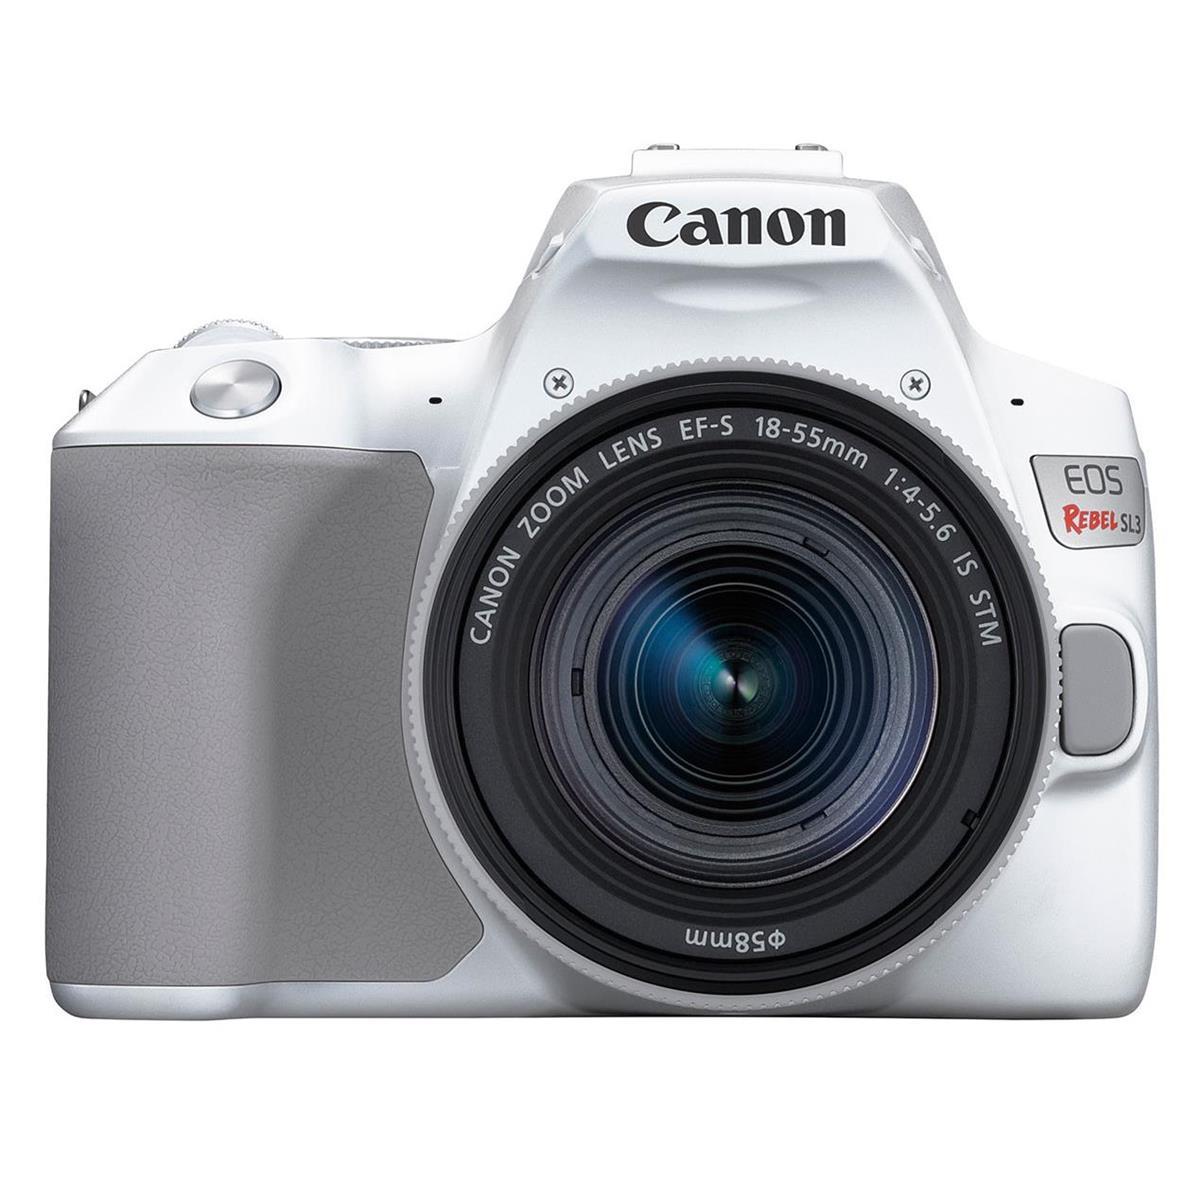 Canon EOS Rebel SL3 DSLR Camera with EF-S 18-55mm f/4-5.6 IS STM Lens - White